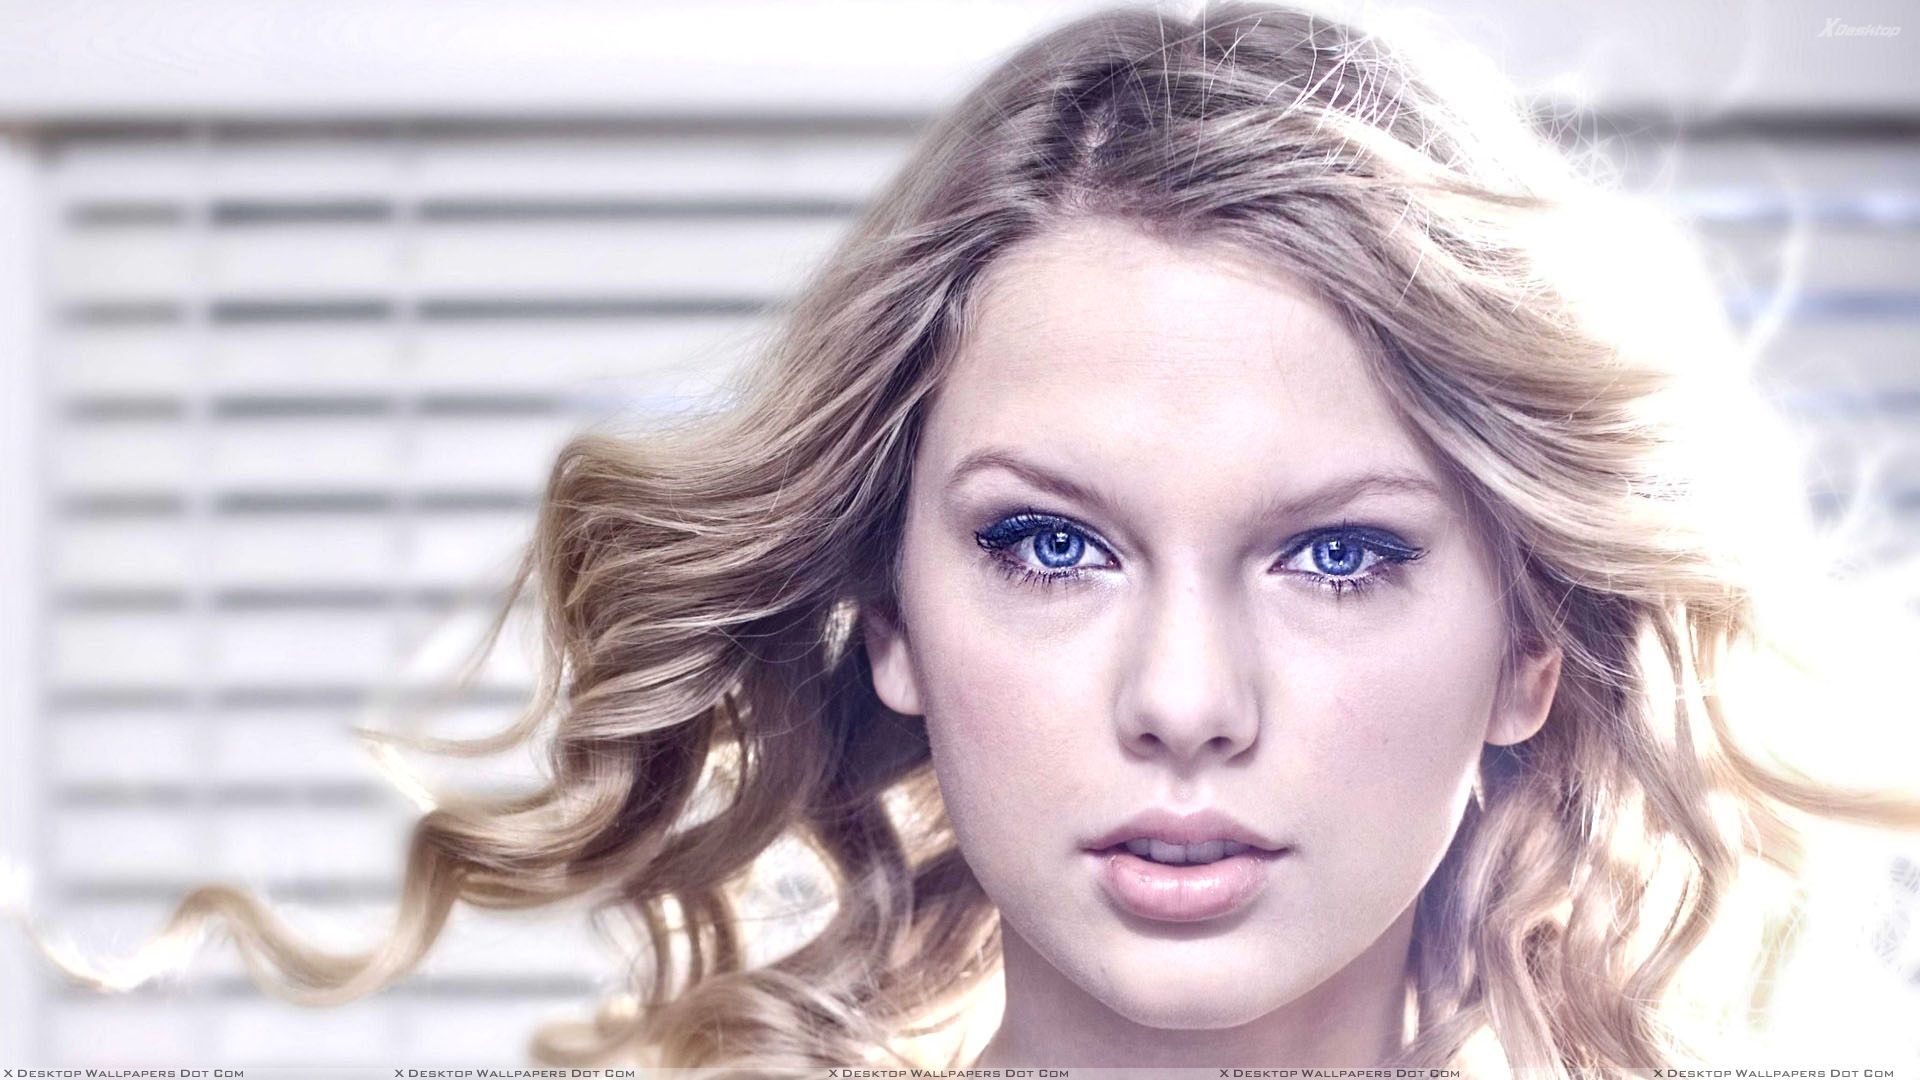 Taylor Swift Wallpapers Photos Images in HD